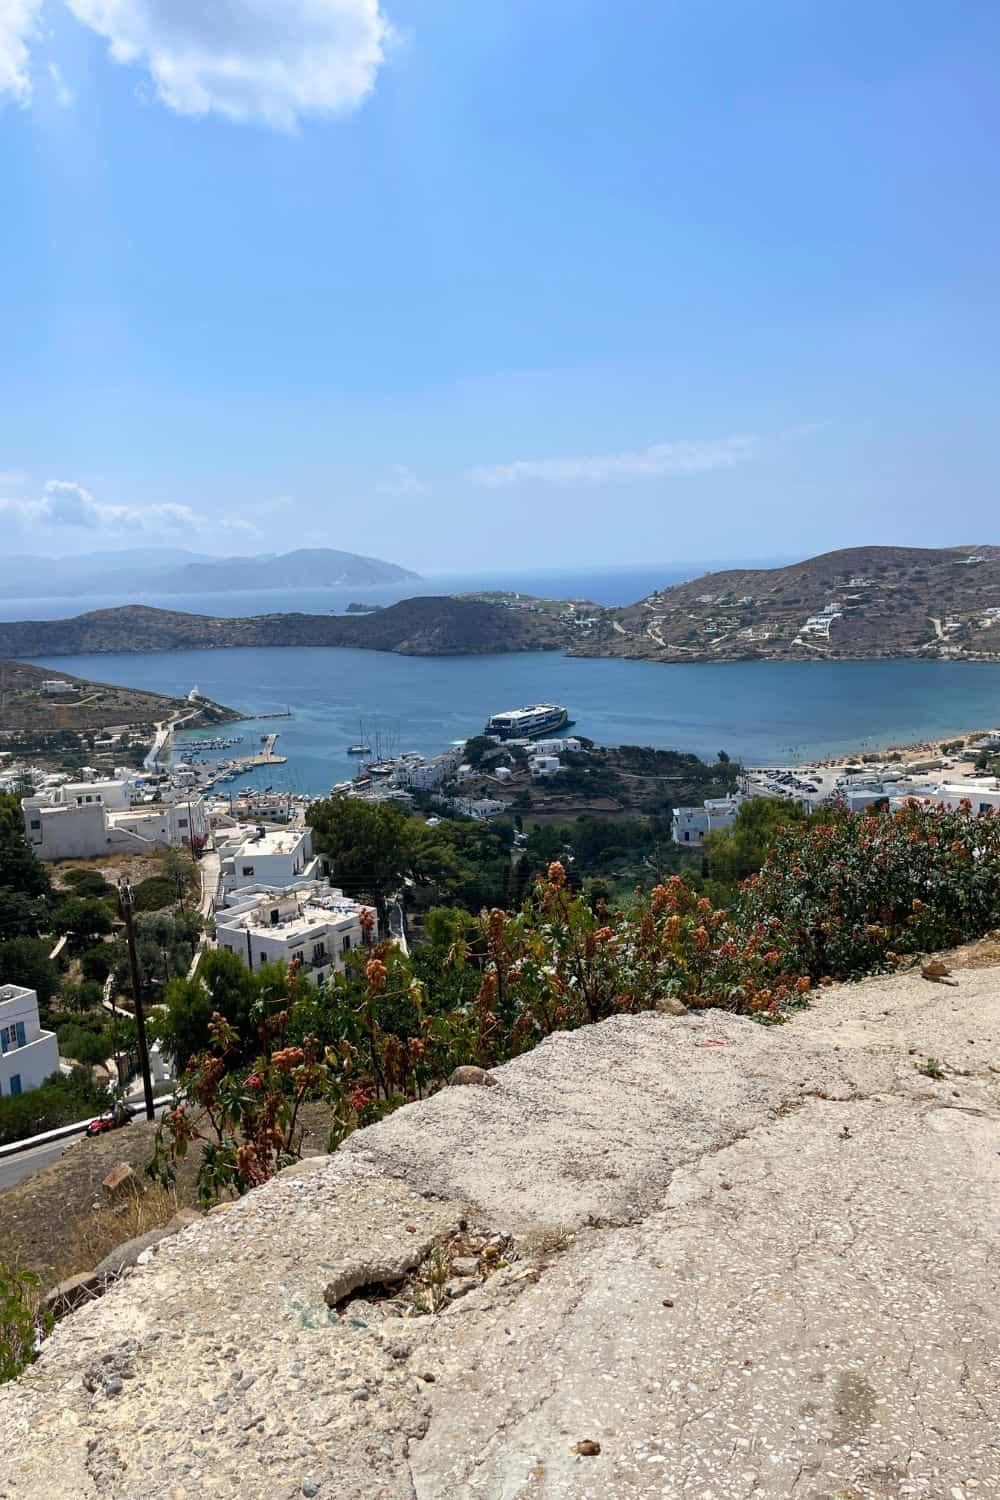 Panoramic view overlooking the harbor of Ios, Greece, with scattered white buildings nestled in the hilly landscape. The azure blue waters of the Aegean Sea create a calm bay, with boats moored in the marina and a ferry docked at the port. The foreground shows wild shrubs and plants typical of the Greek islands, thriving in the Mediterranean climate.